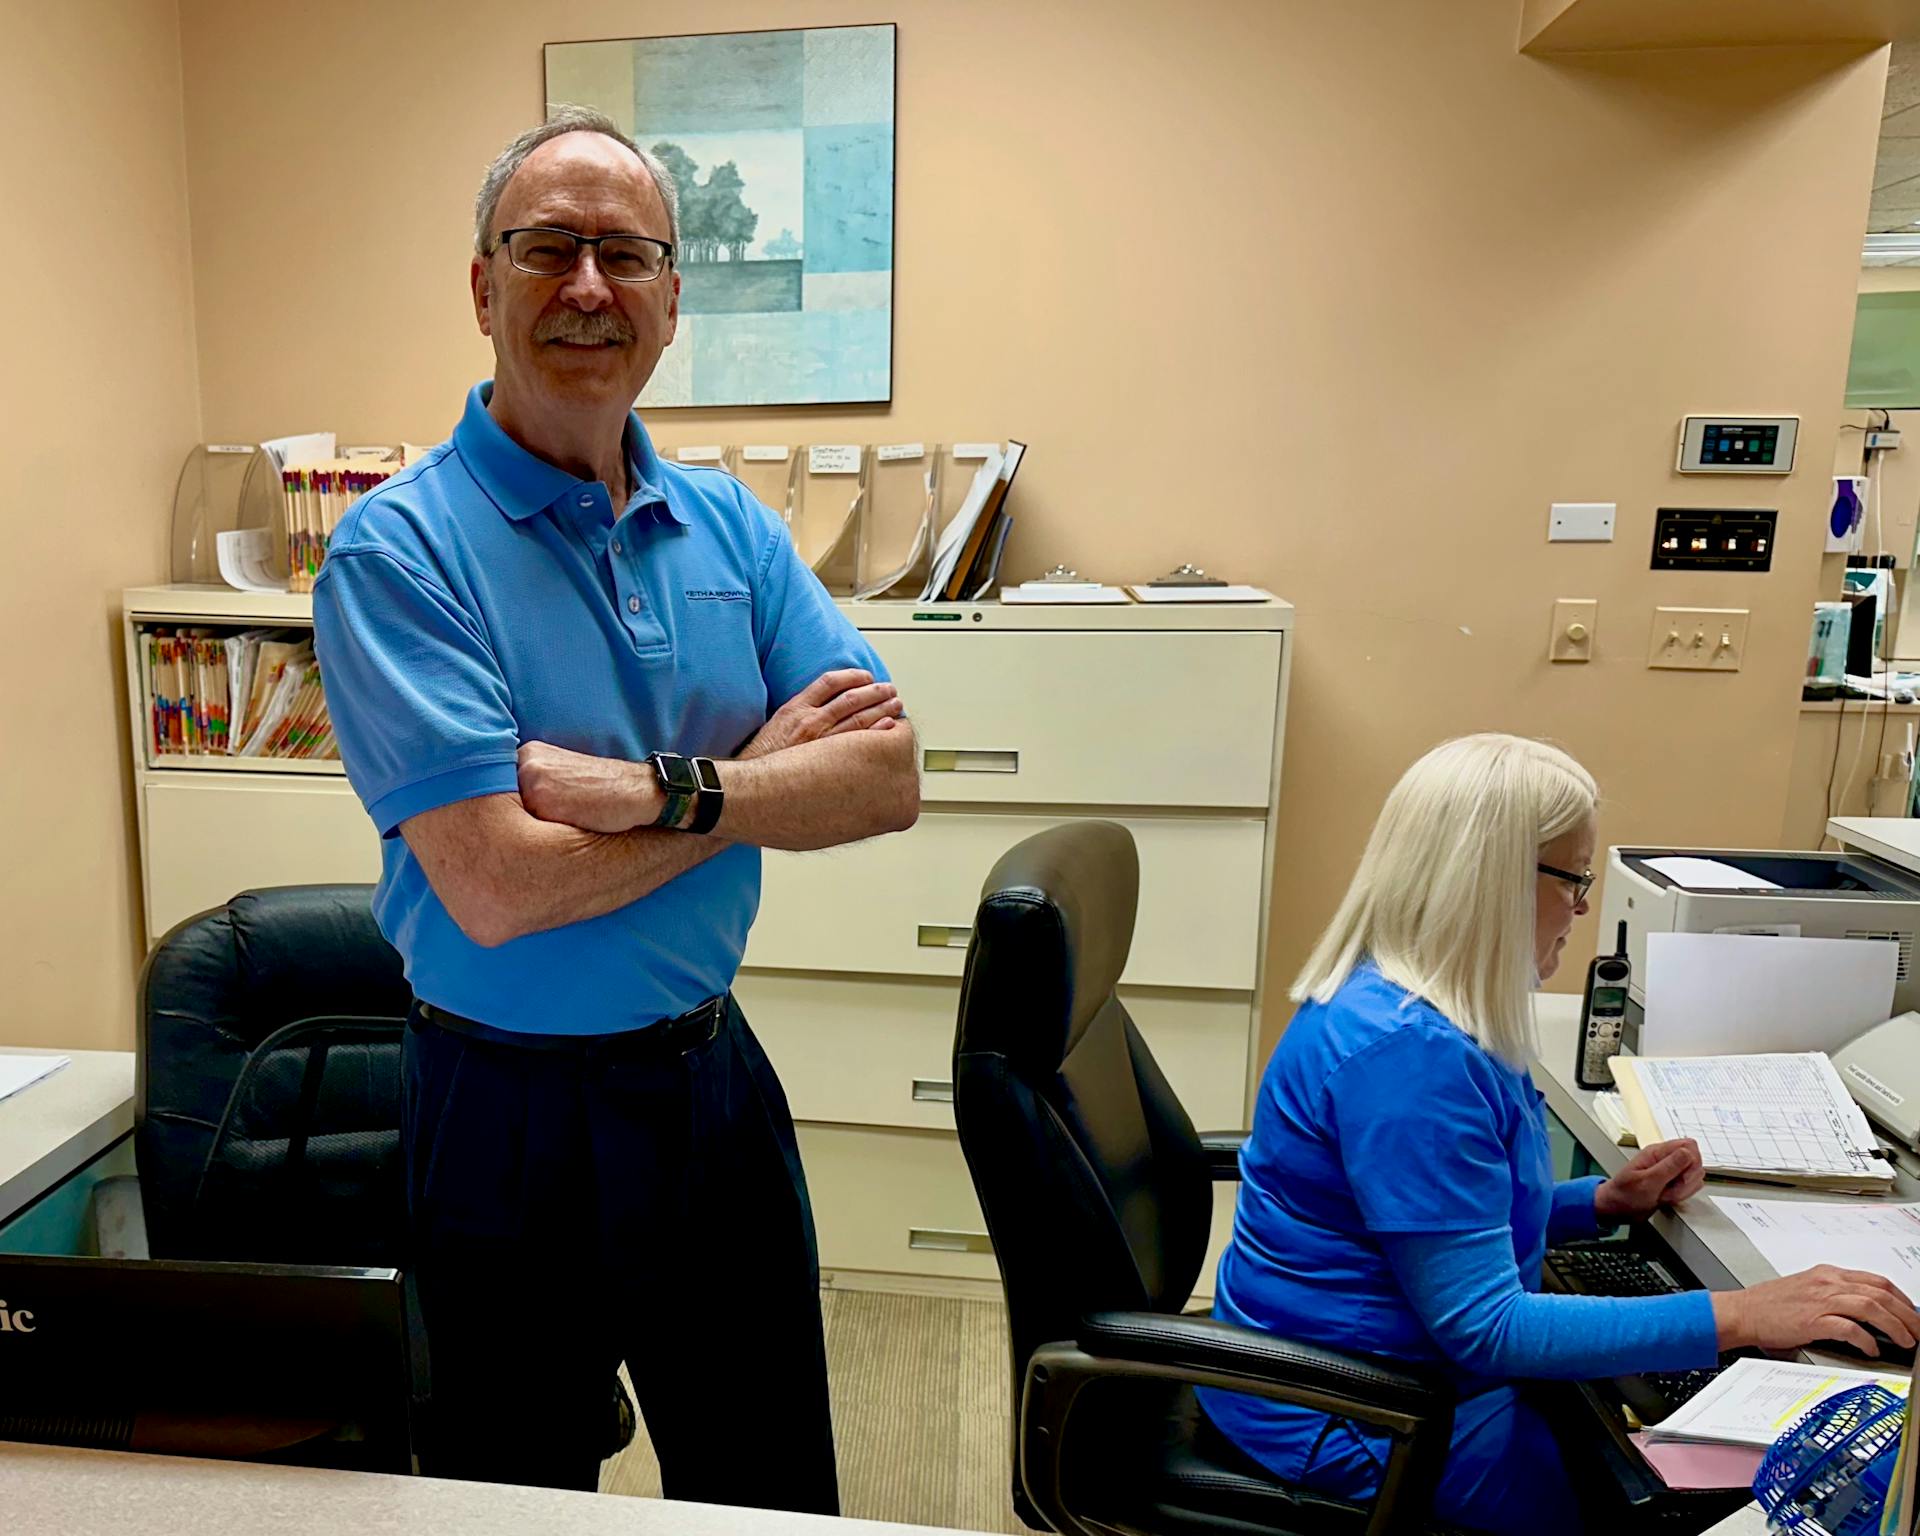 Dr. Keith A. Brown DDS, FAGD, at the dental office reception desk in Naperville, IL.